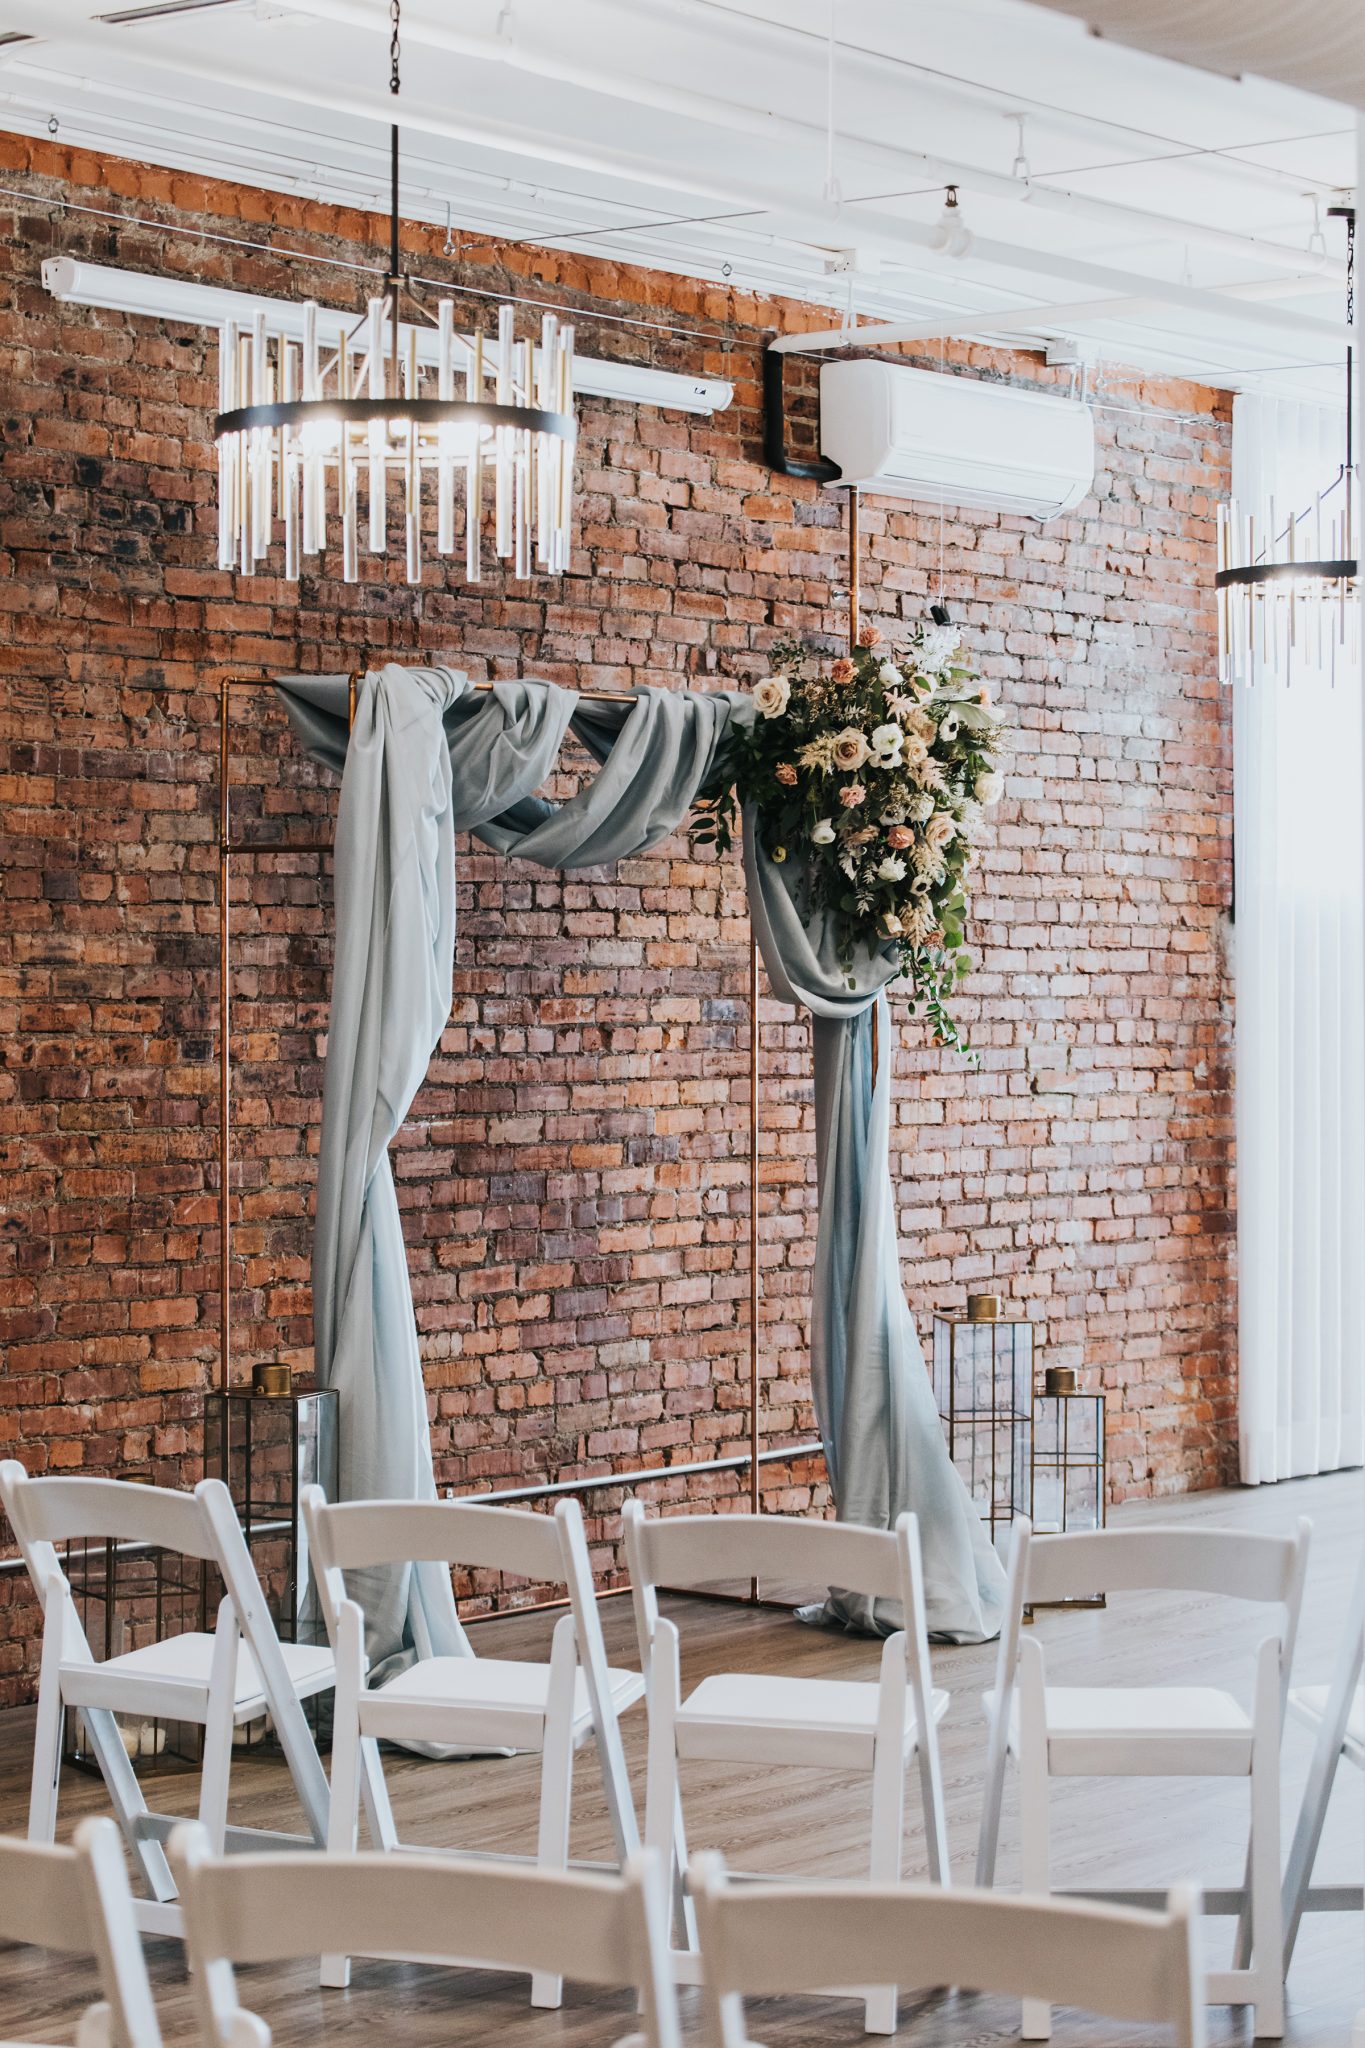 7 Tips For Making The Most Out of Your Wedding Decor Budget | Brontë Bride Blog, Wedding Inspiration, Advice, & Resources